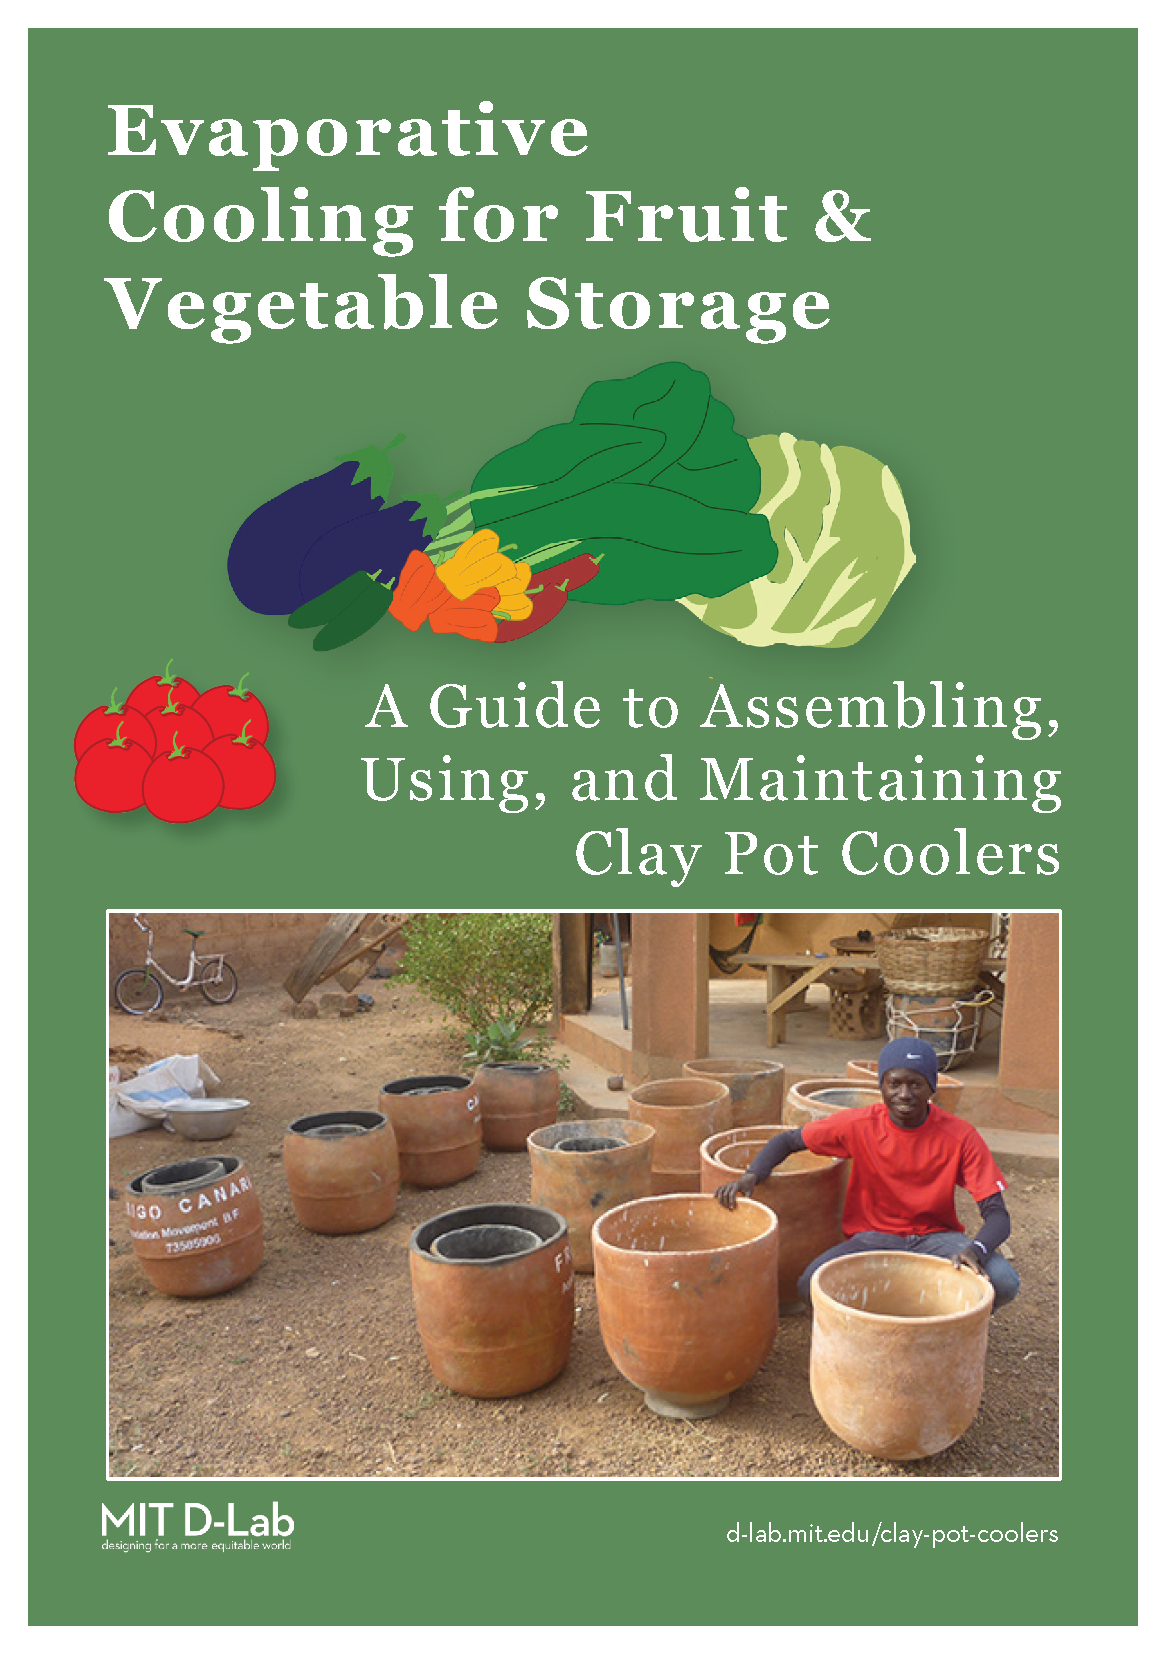 Cover page for Evaporative Cooling for Fruit & Vegetable Storage: A Guide to Assembling, Using, and Maintaining Clay Pot Coolers